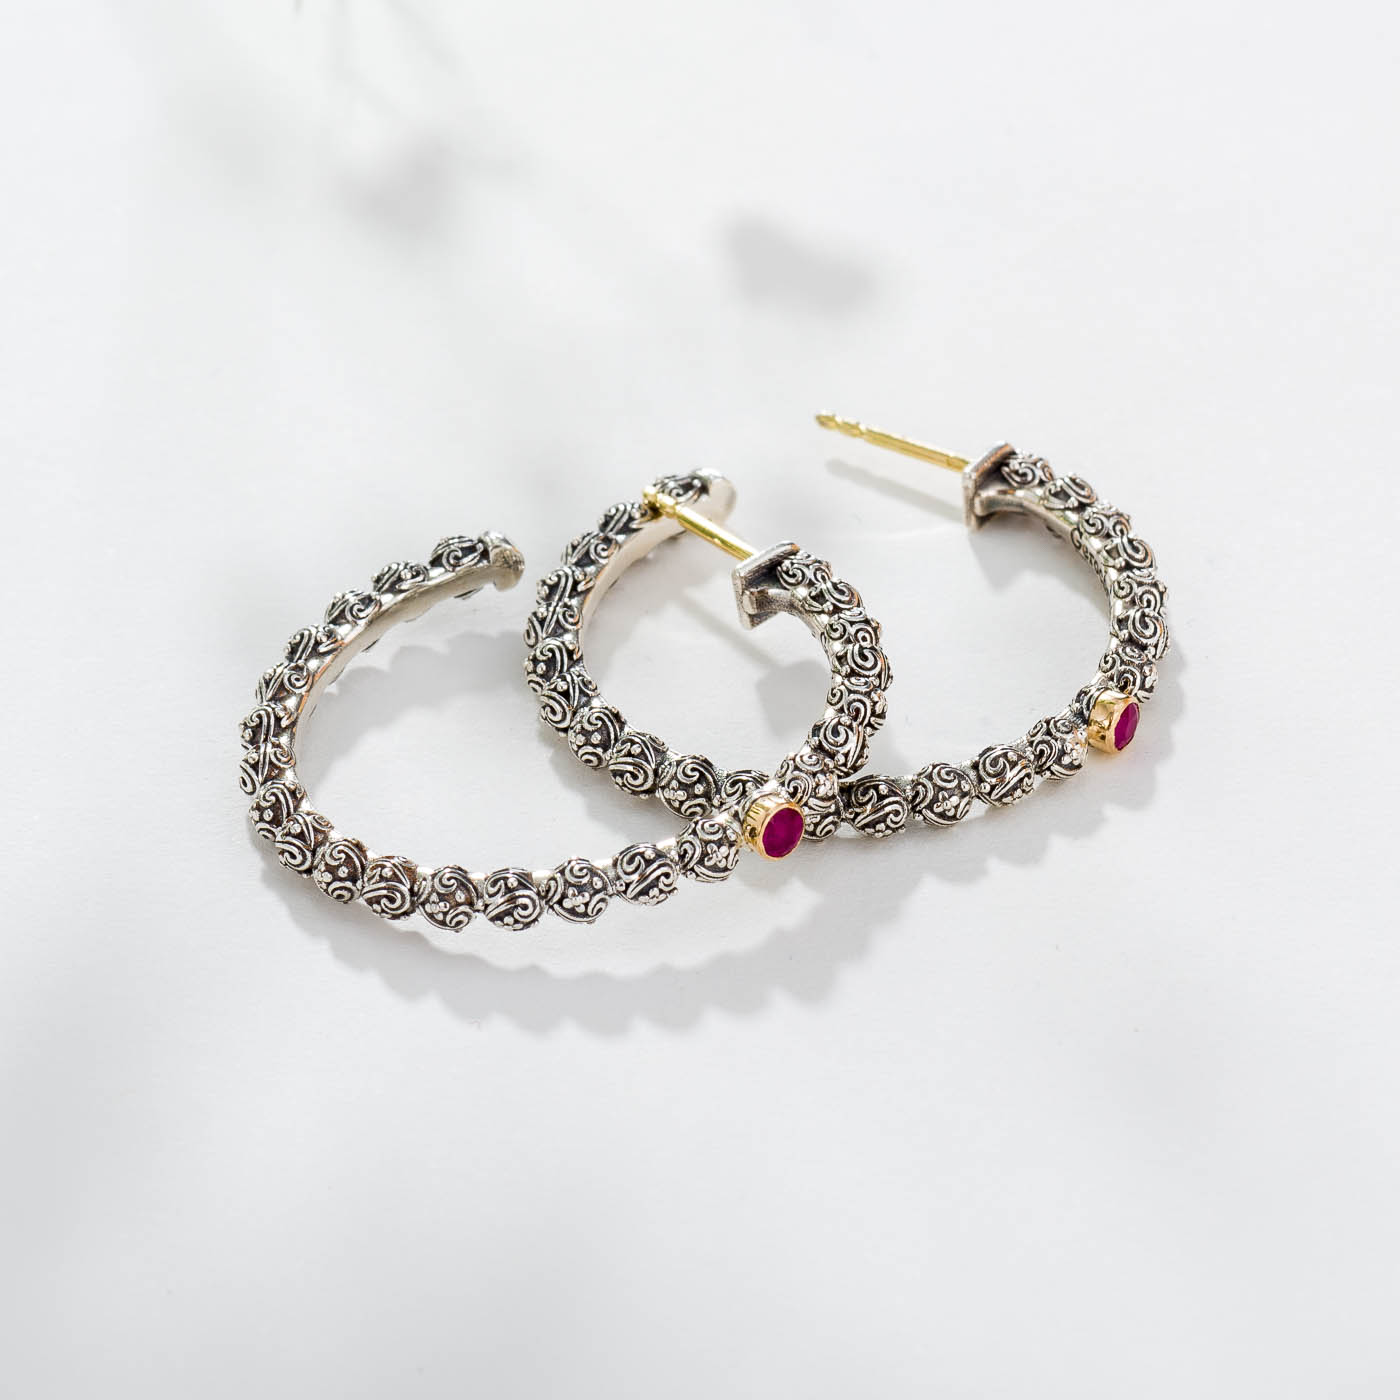 Eve hoops Earrings in 18K Gold and Sterling silver with Gemstones